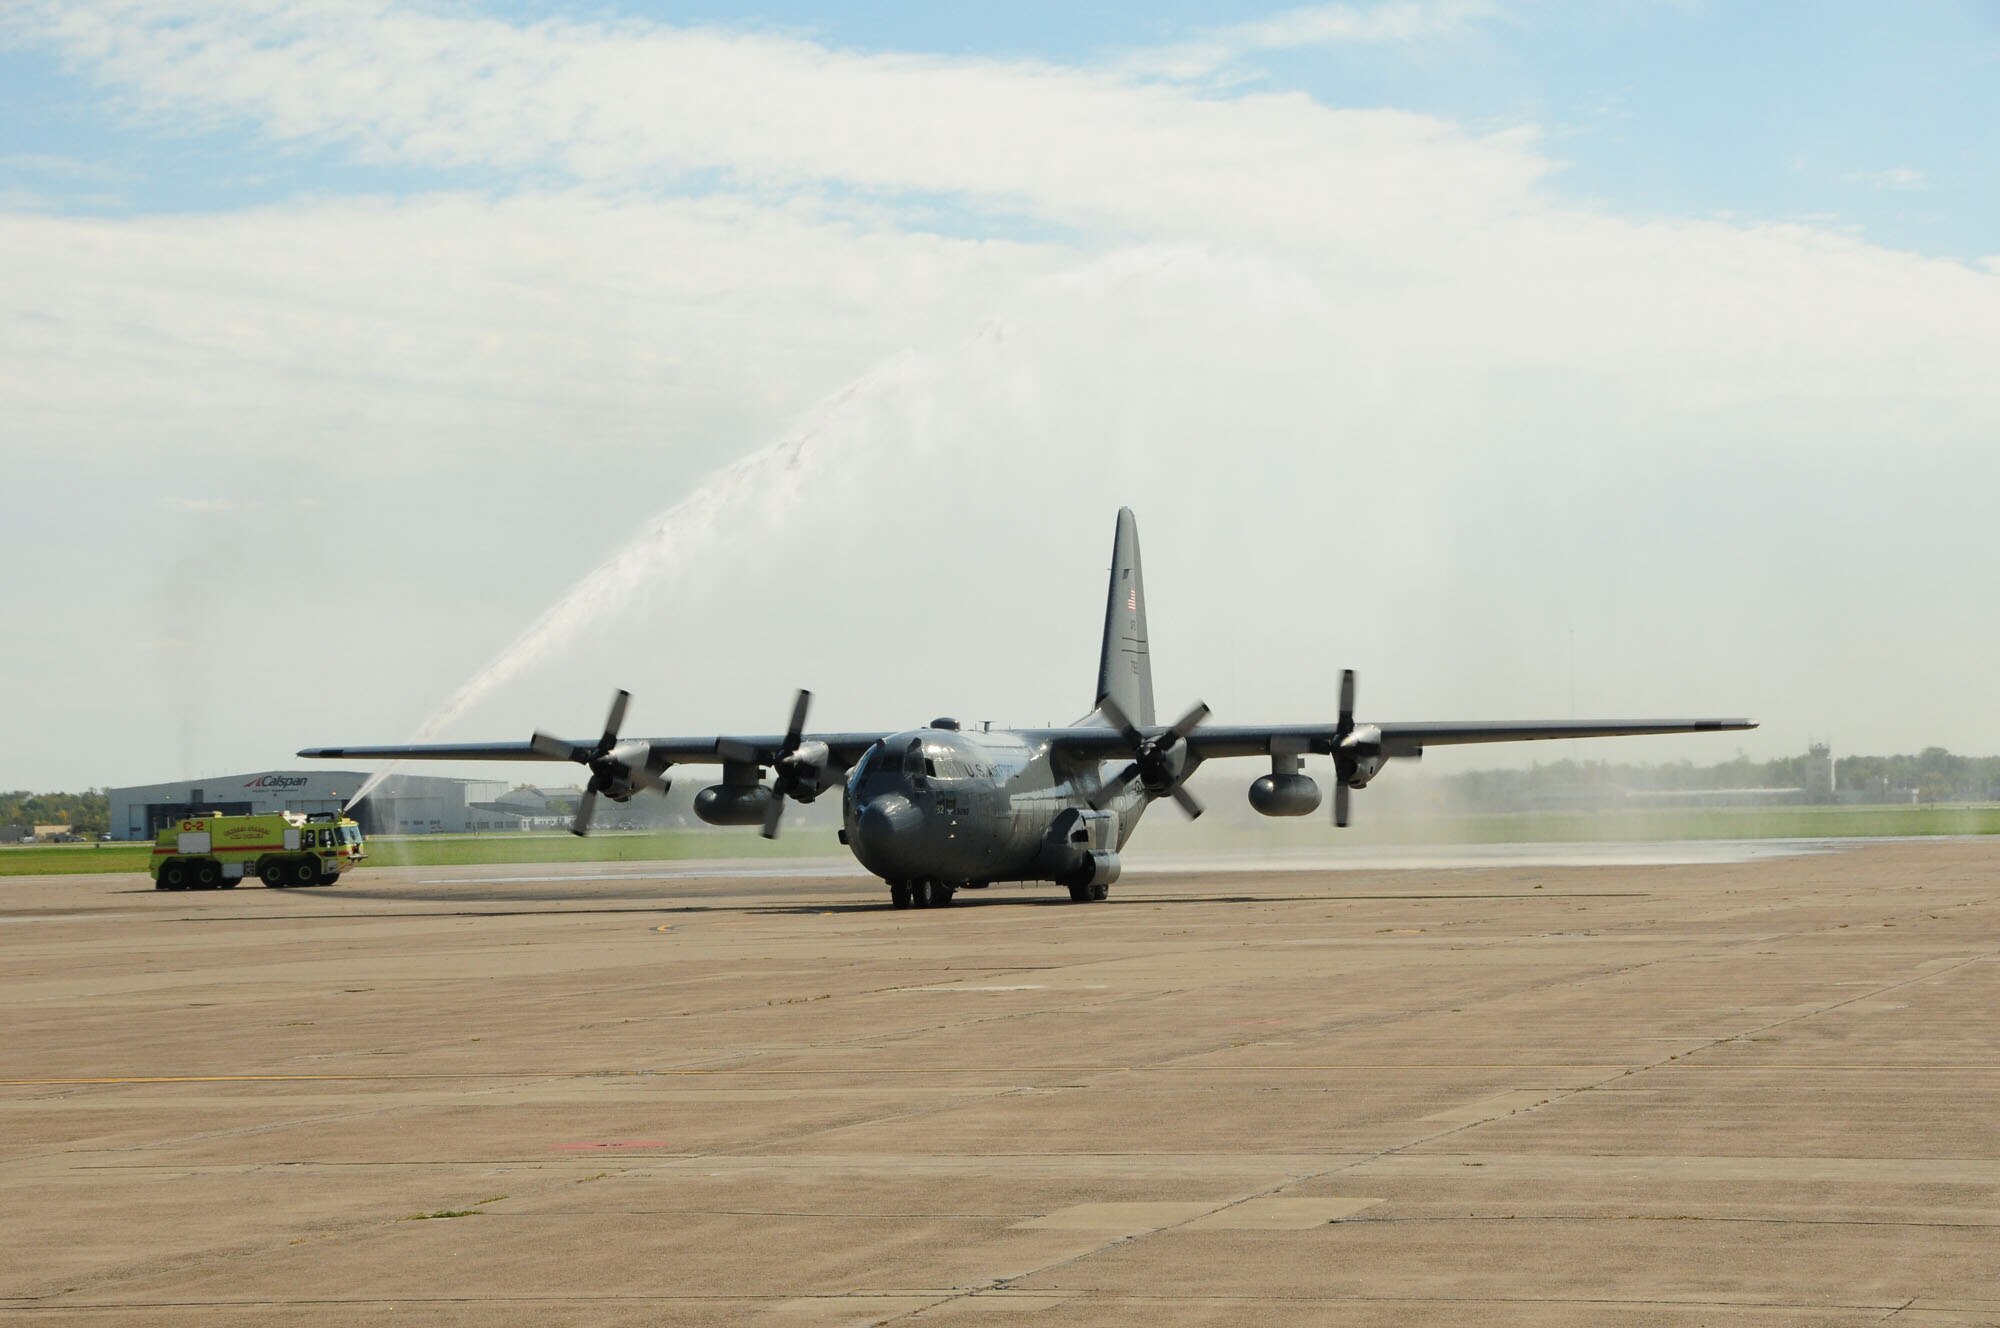 A C-130 aircraft receives a "water salute" after returning from its final flight by a crew from the New York Air National Guard's 107th Airlift Wing to Niagara Falls Air Reserve Station in Niagara Falls, N.Y. on Thursday, Sept. 25, 2014. It was the last C-130 flight for the 107th Airlift Wing as it converts to MQ-9 operations. (U.S. Air National Guard Photo by Senior Master Sgt. Raymond Lloyd/Released)